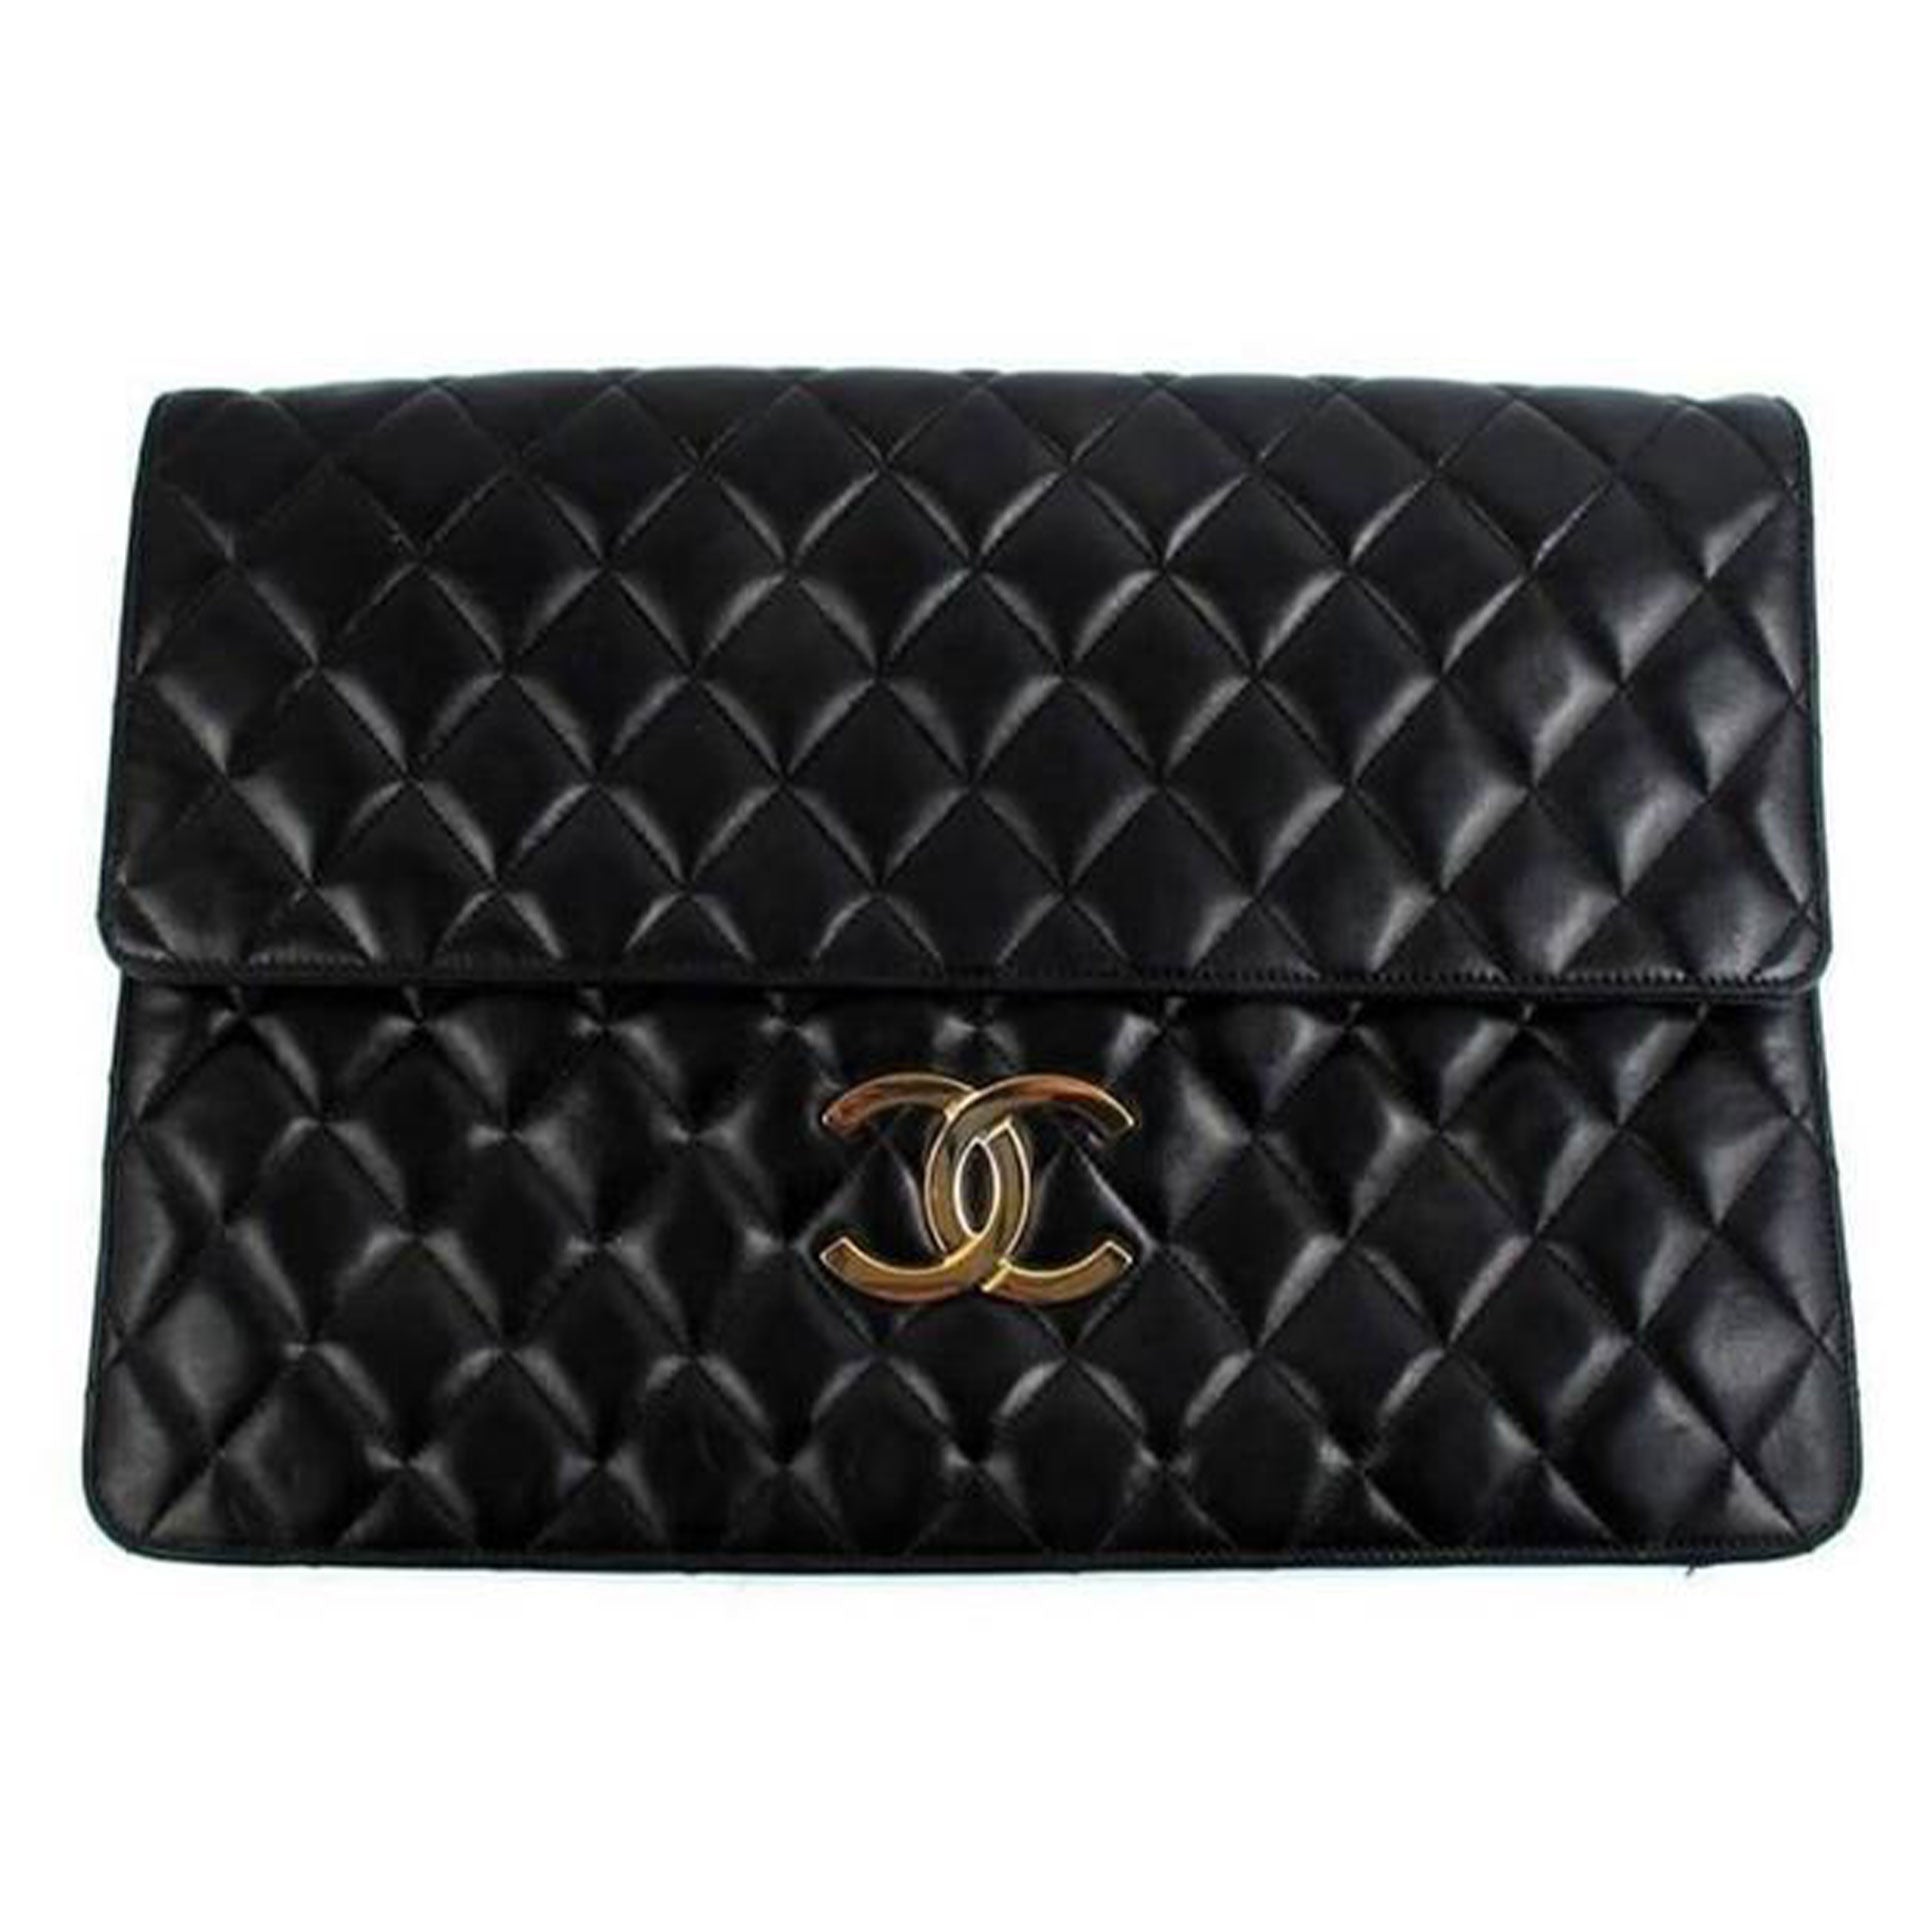 $3300 Chanel Classic In the Business Maxi Jumbo Flap in Red Calfksin  Leather Shoulder Bag Purse - Lust4Labels